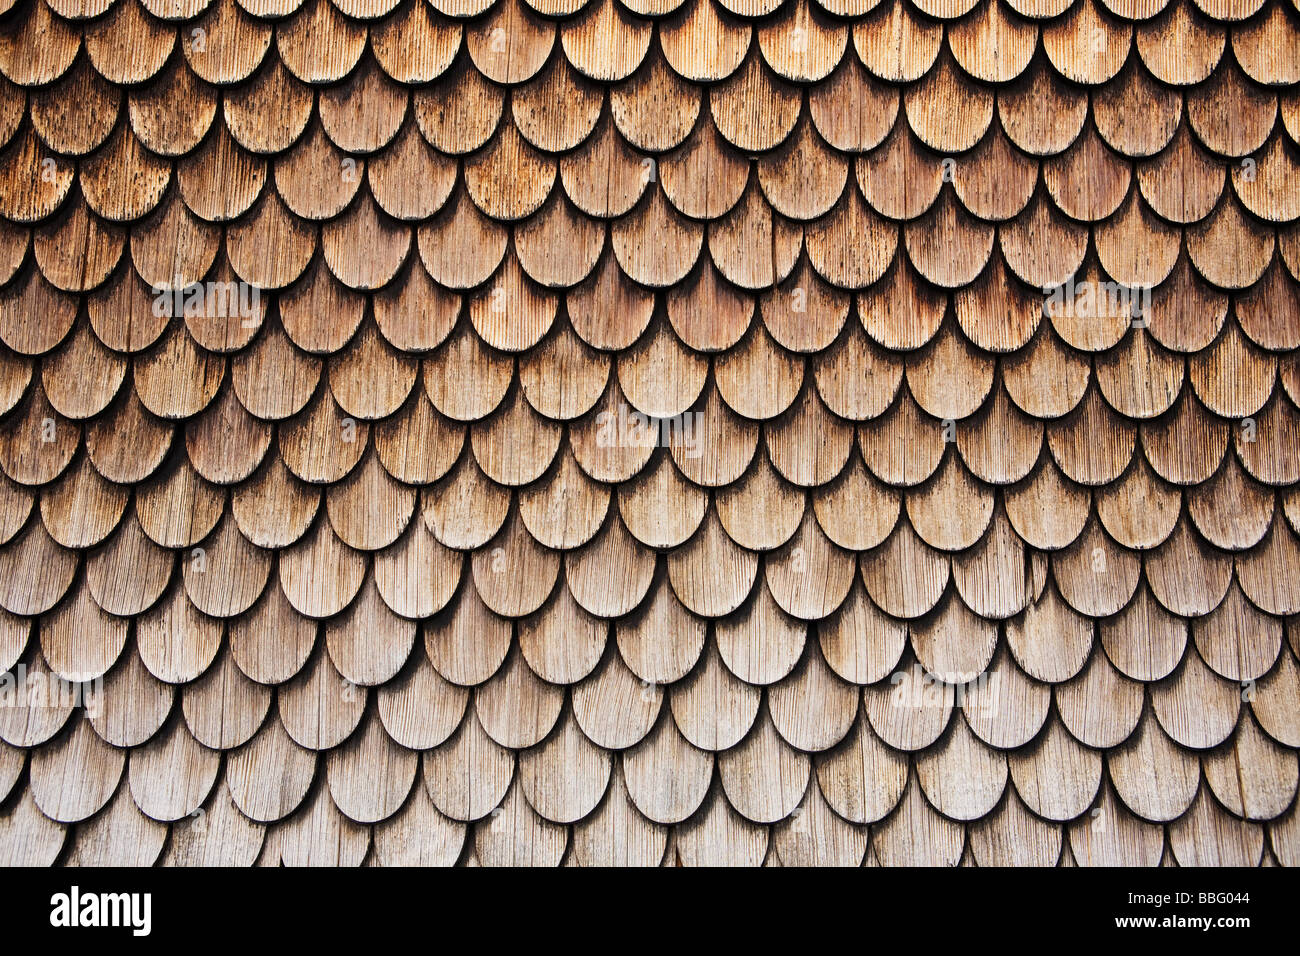 Wooden roof tiles Stock Photo